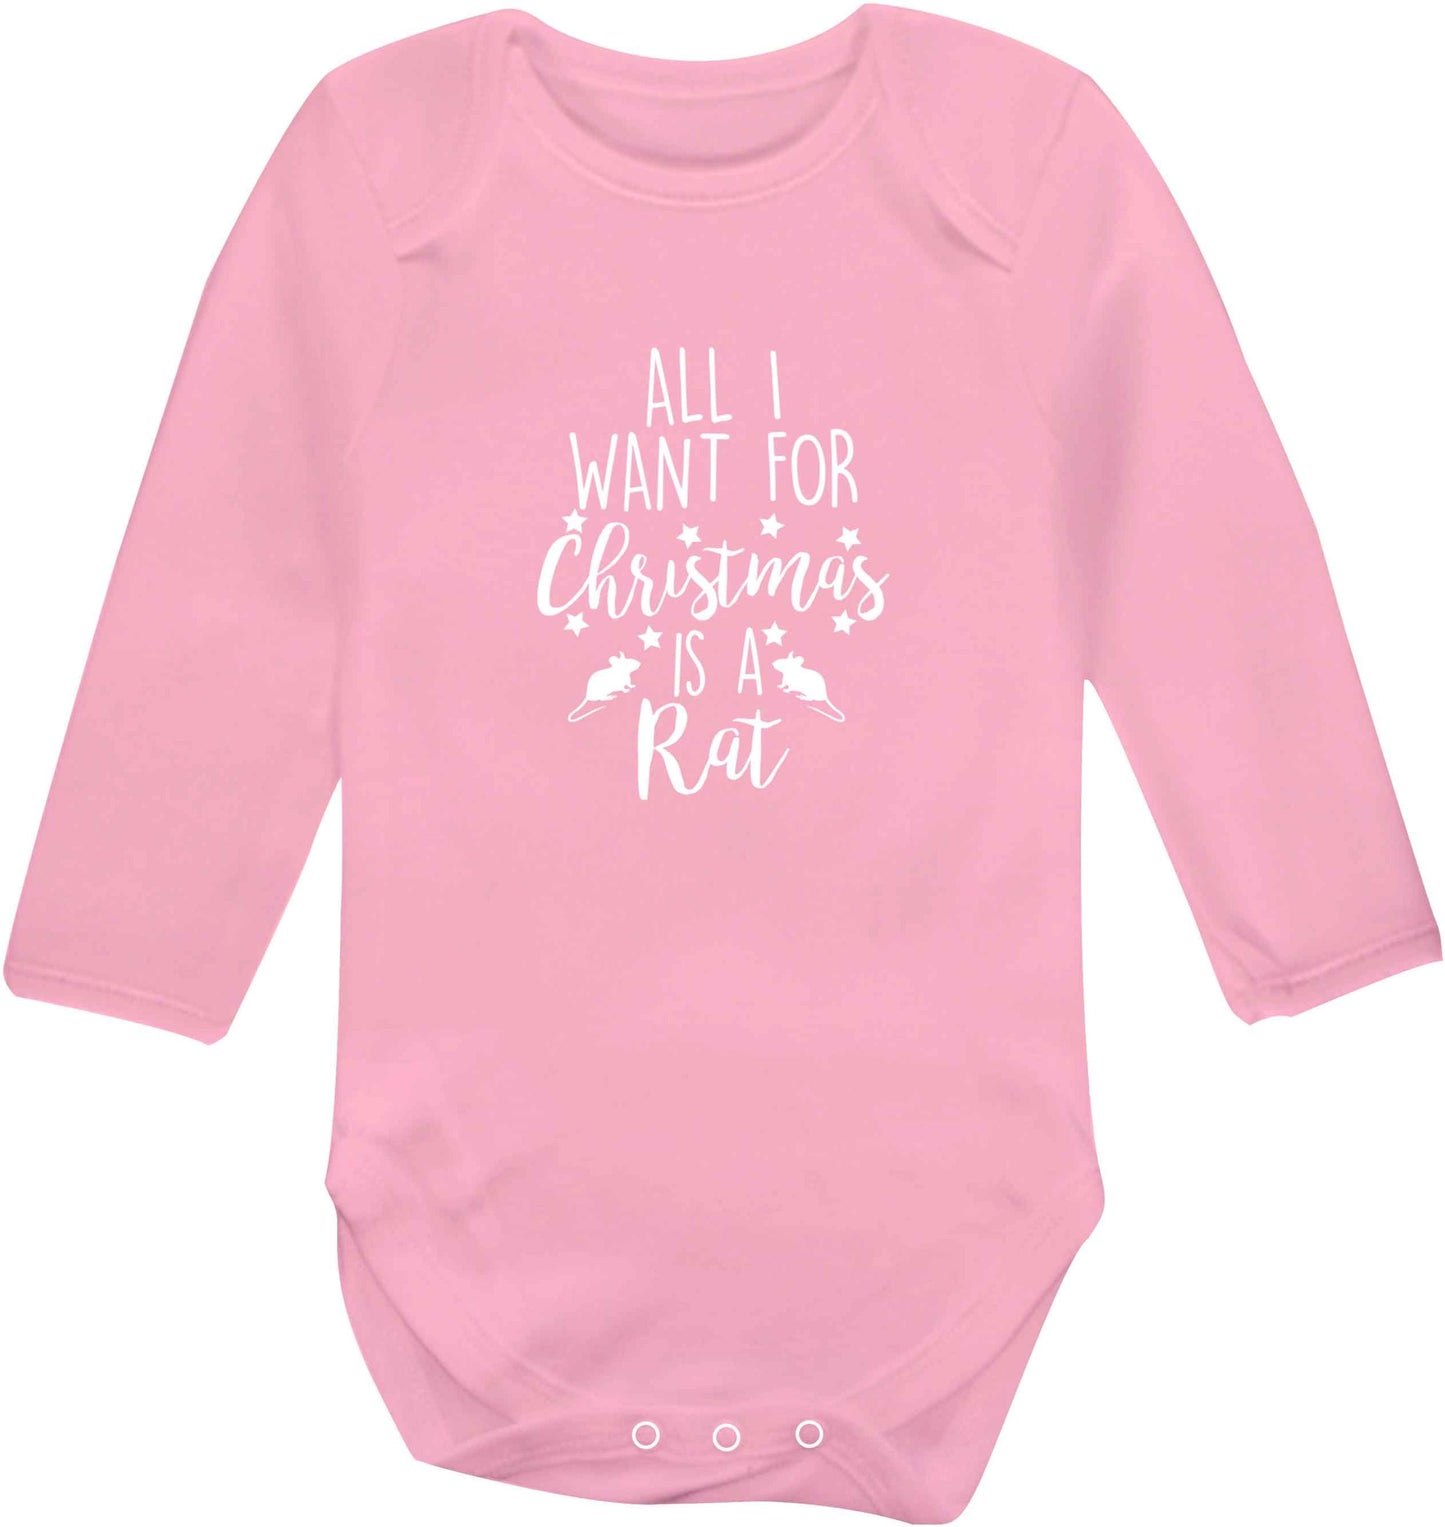 All I want for Christmas is a rat baby vest long sleeved pale pink 6-12 months